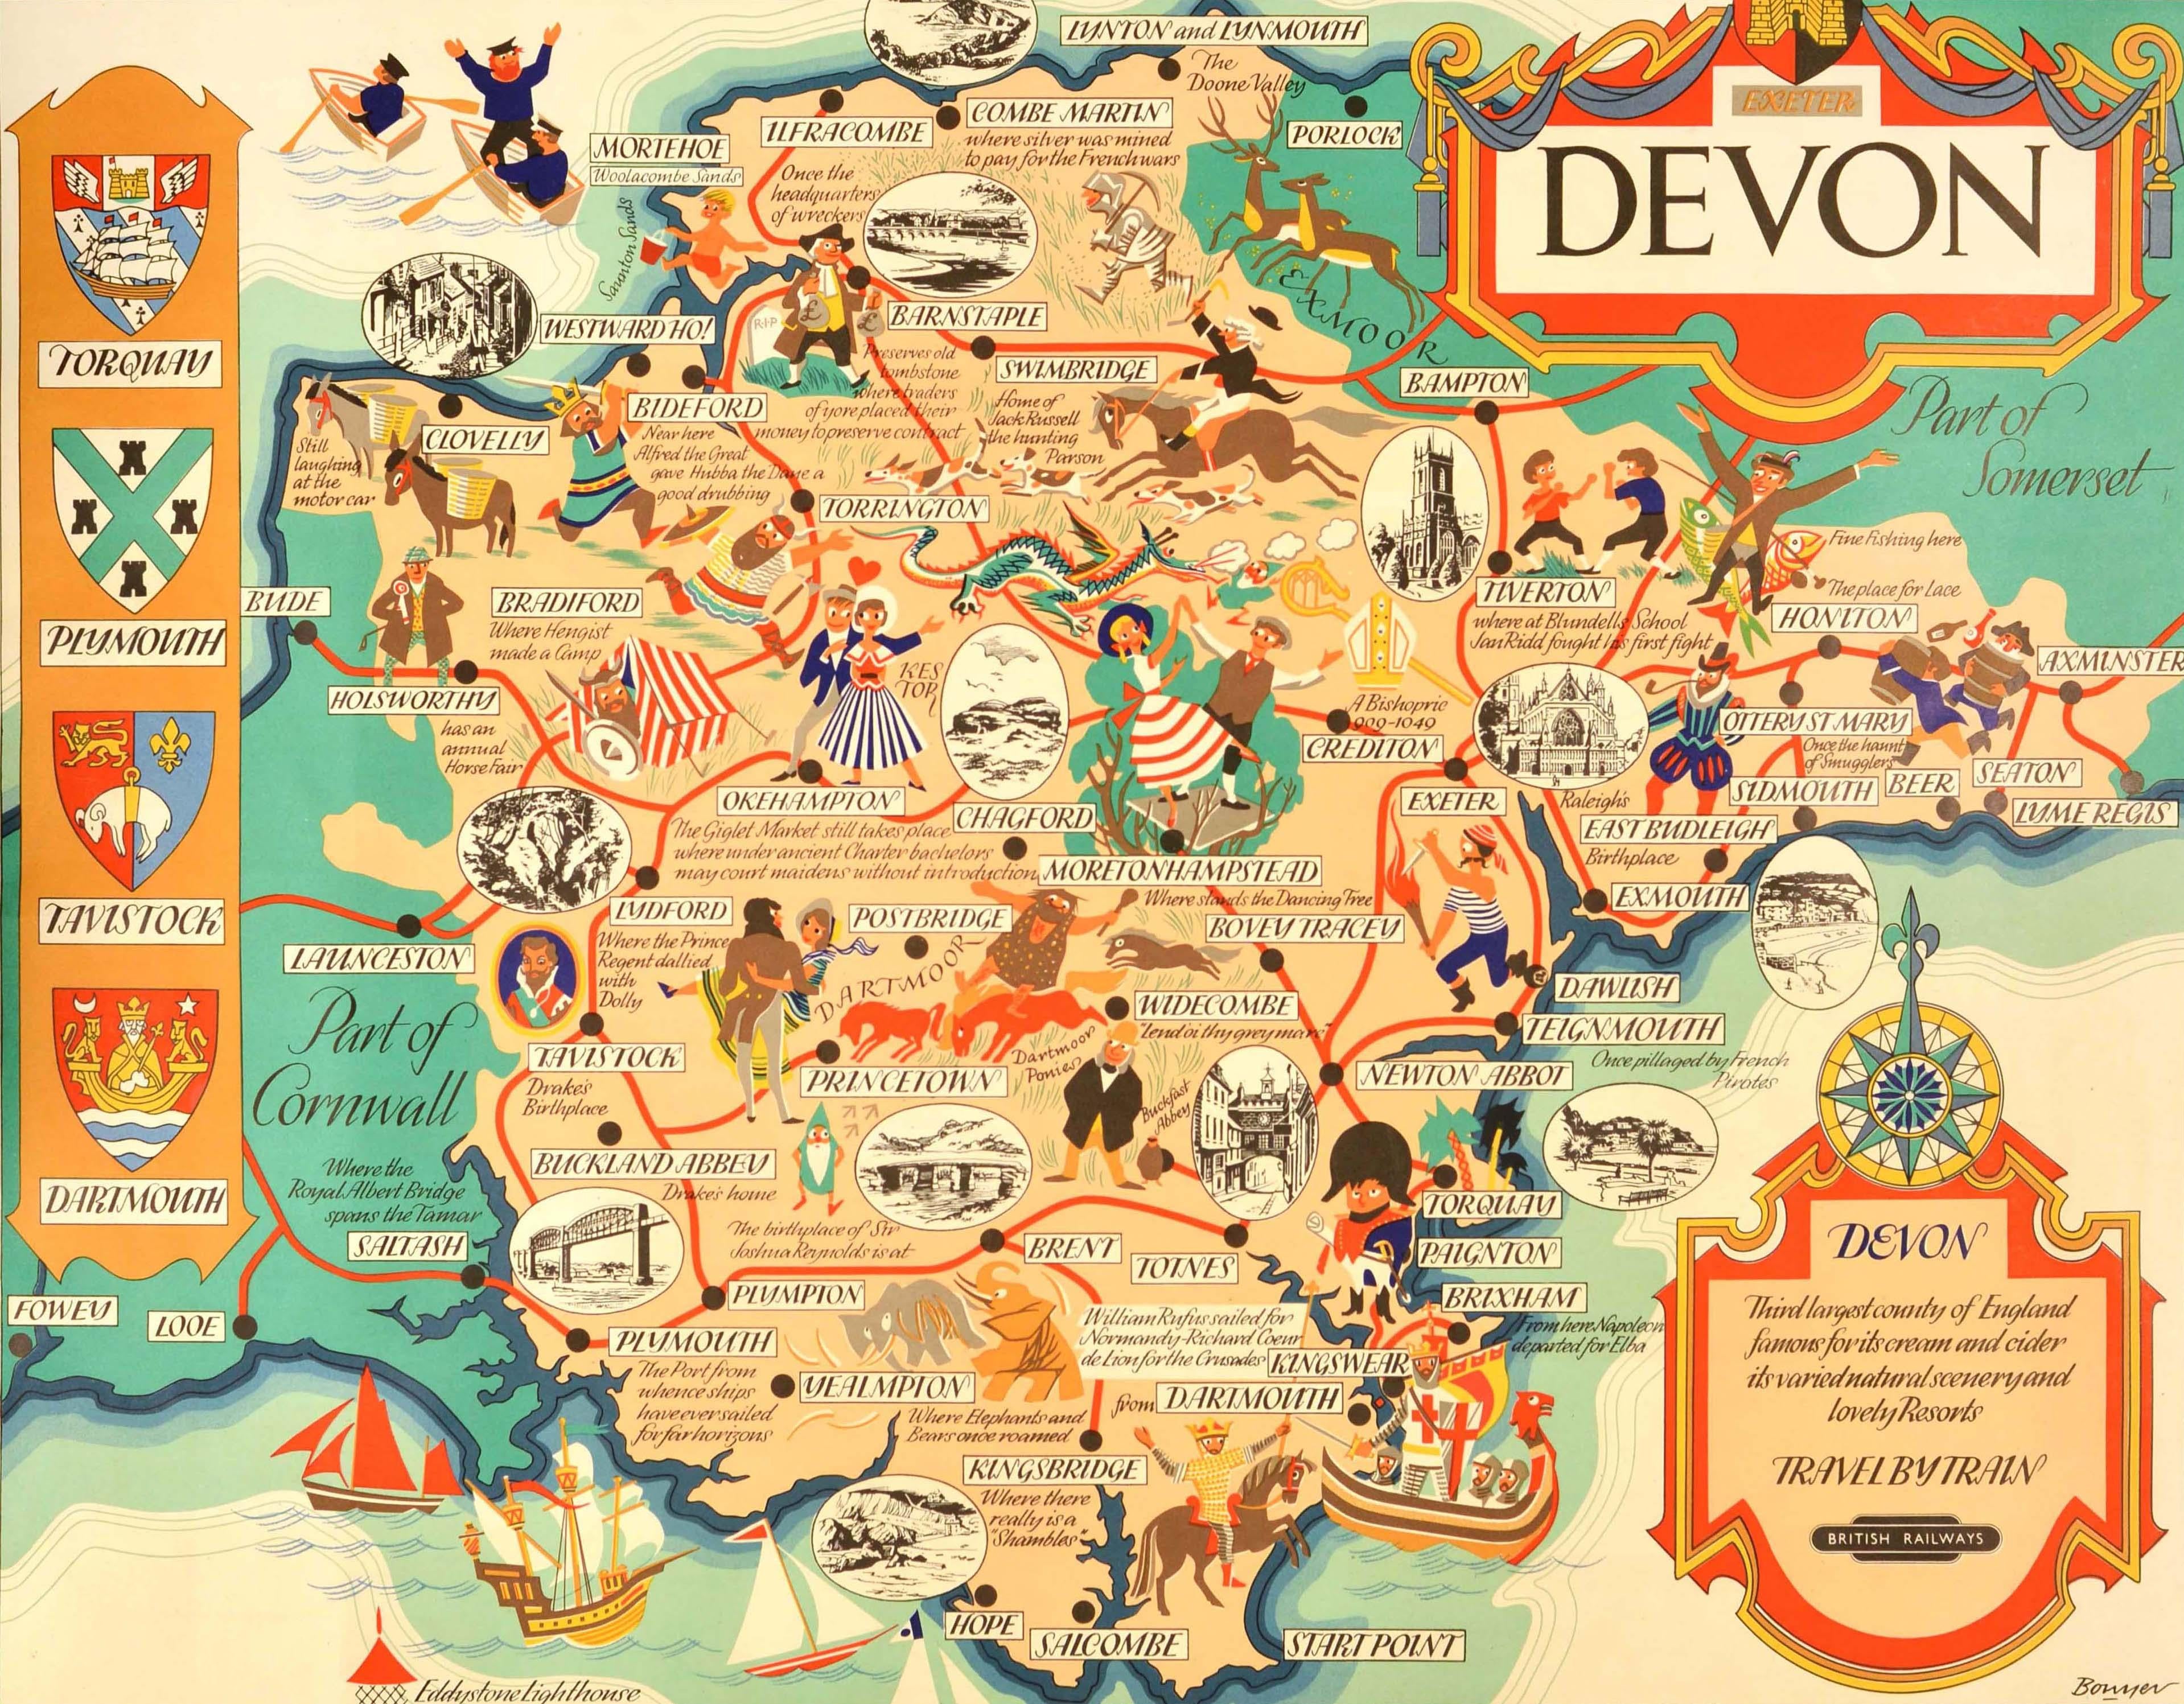 Original vintage Travel By Train British Railways poster - Devon Third largest county of England famous for its cream and cider its varied natural scenery and lovely resorts - featuring a fun and colourful pictorial map of Devon between Somerset and